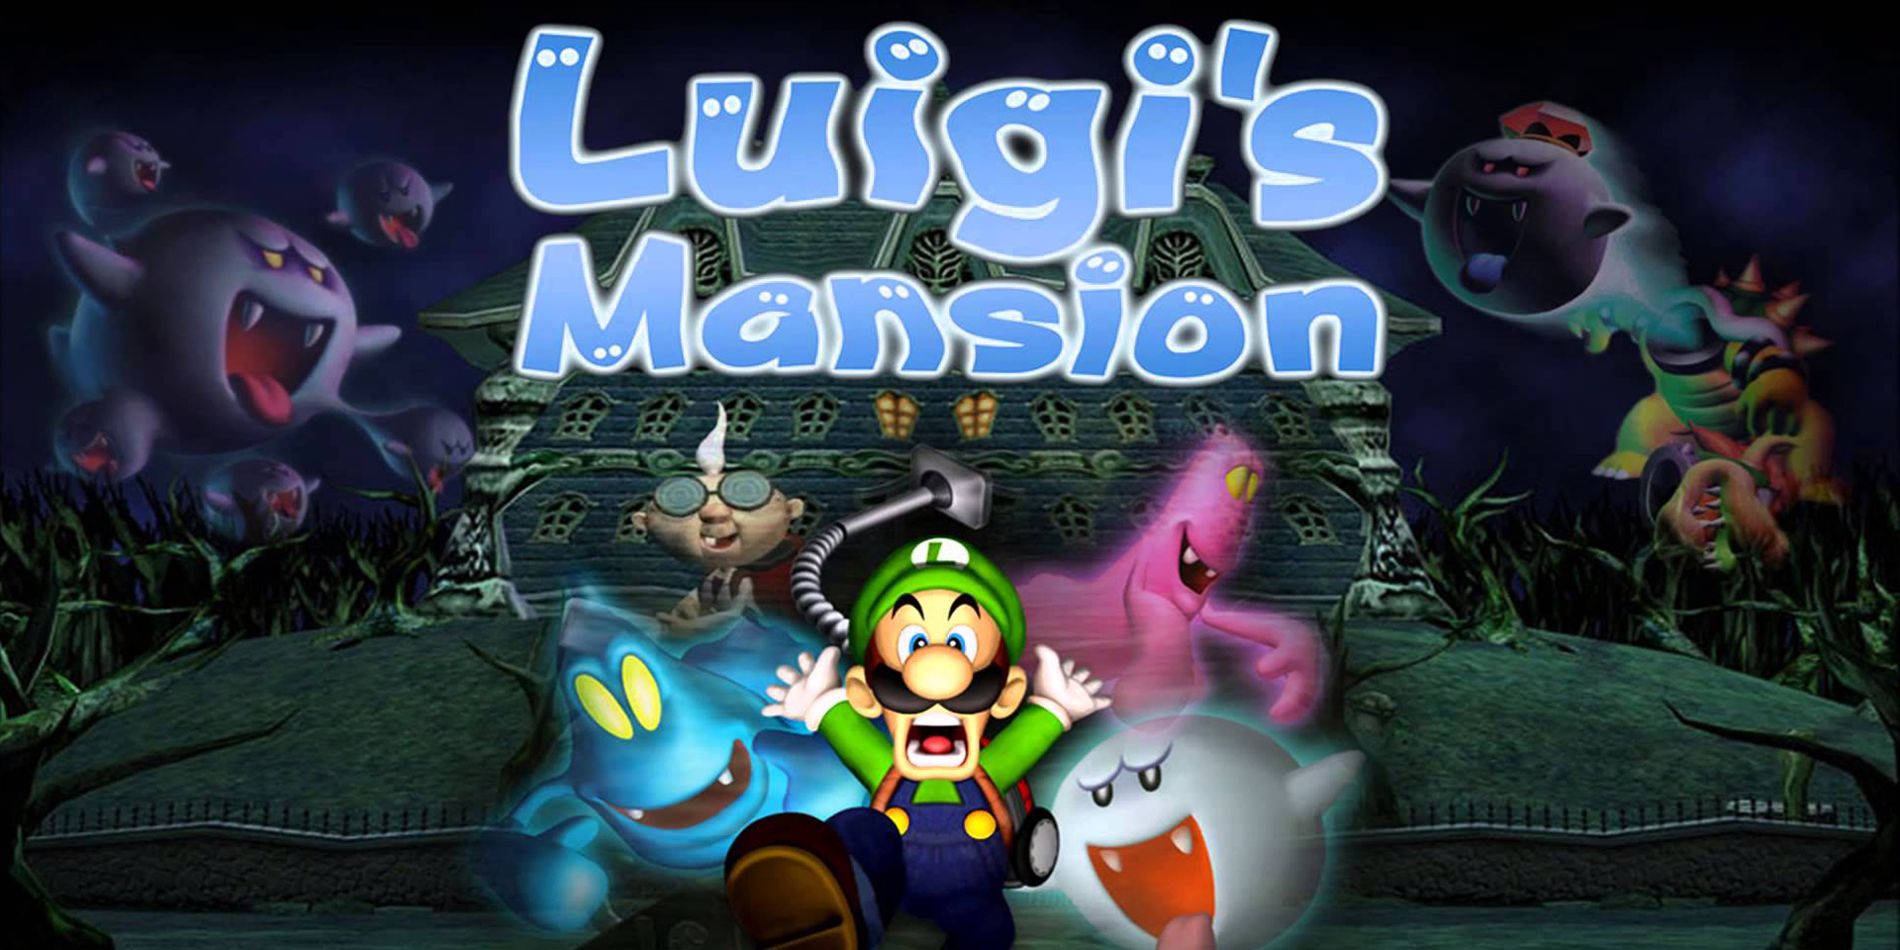 Luigi’s Mansion Changed Mario’s Brother Forever